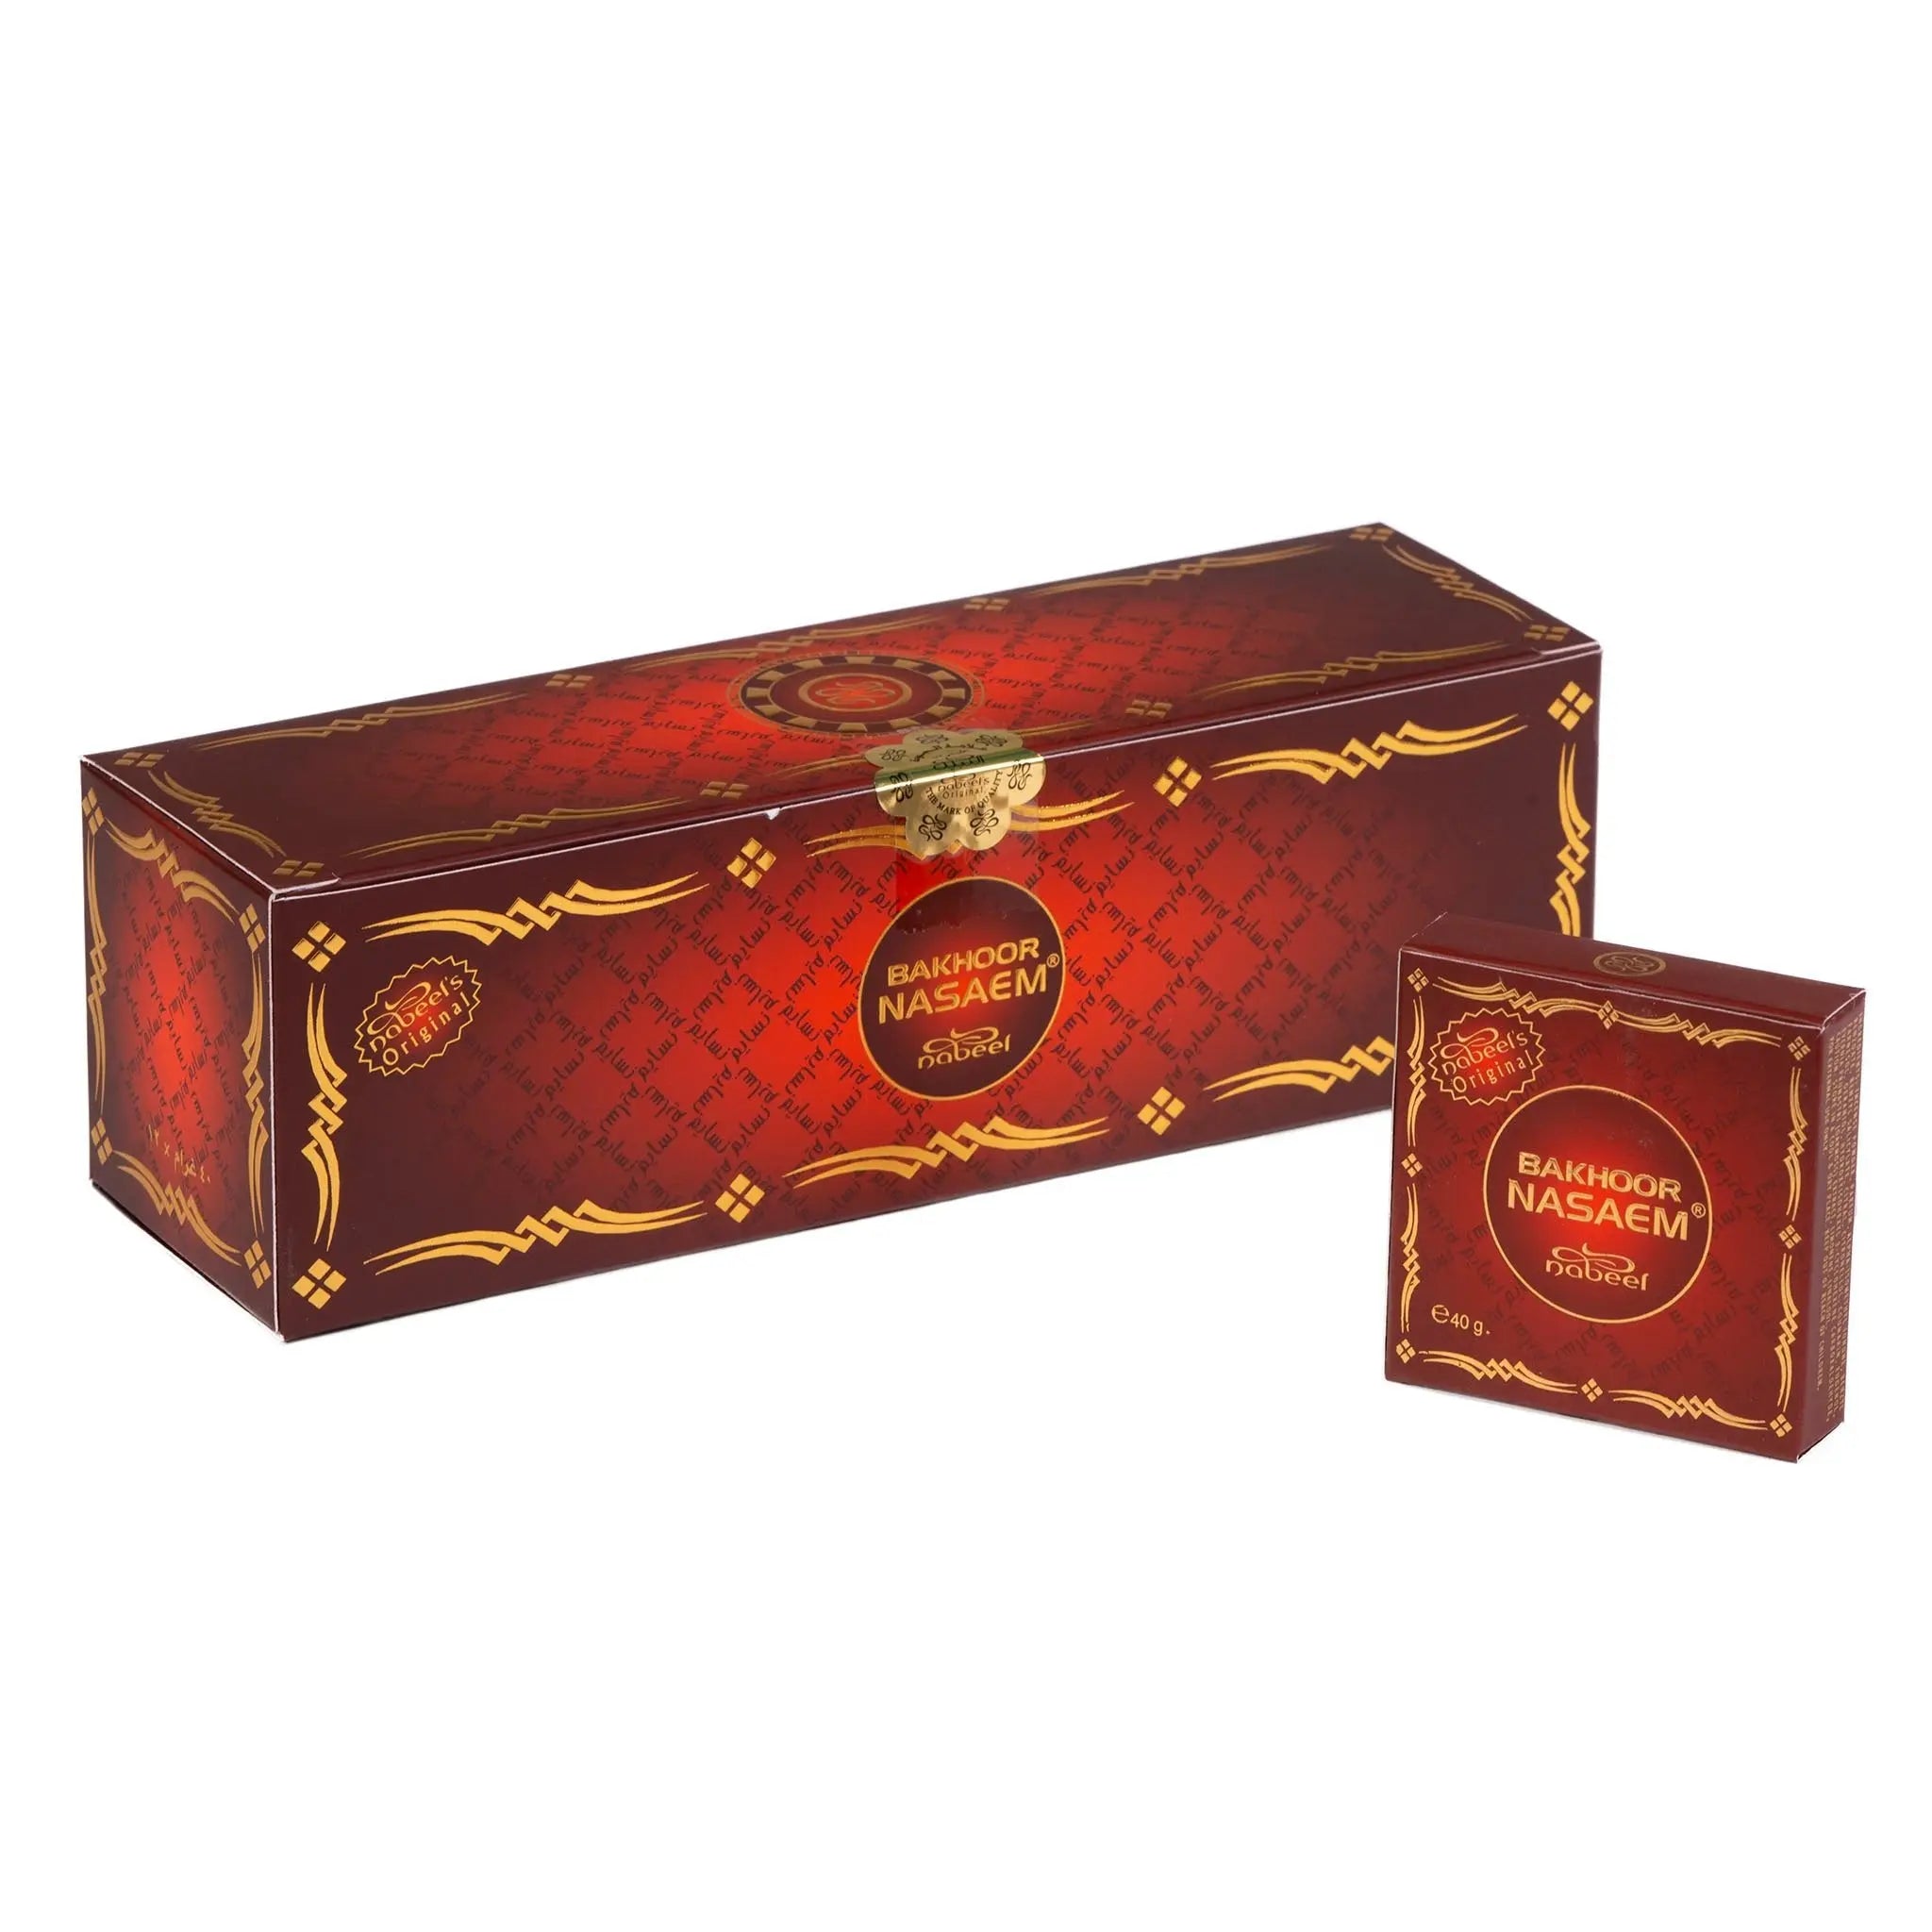 The image shows two boxes of "Bakhoor Nasaem" by Nabeel Perfumes. The boxes have a rich maroon color with intricate golden patterns and Arabic calligraphy. The larger box, likely designed for multiple bakhoor packets, features a circular design in the center with the brand's seal. The smaller box, possibly for individual sale, has the product name in both Arabic and English with the weight "40g" noted on it.